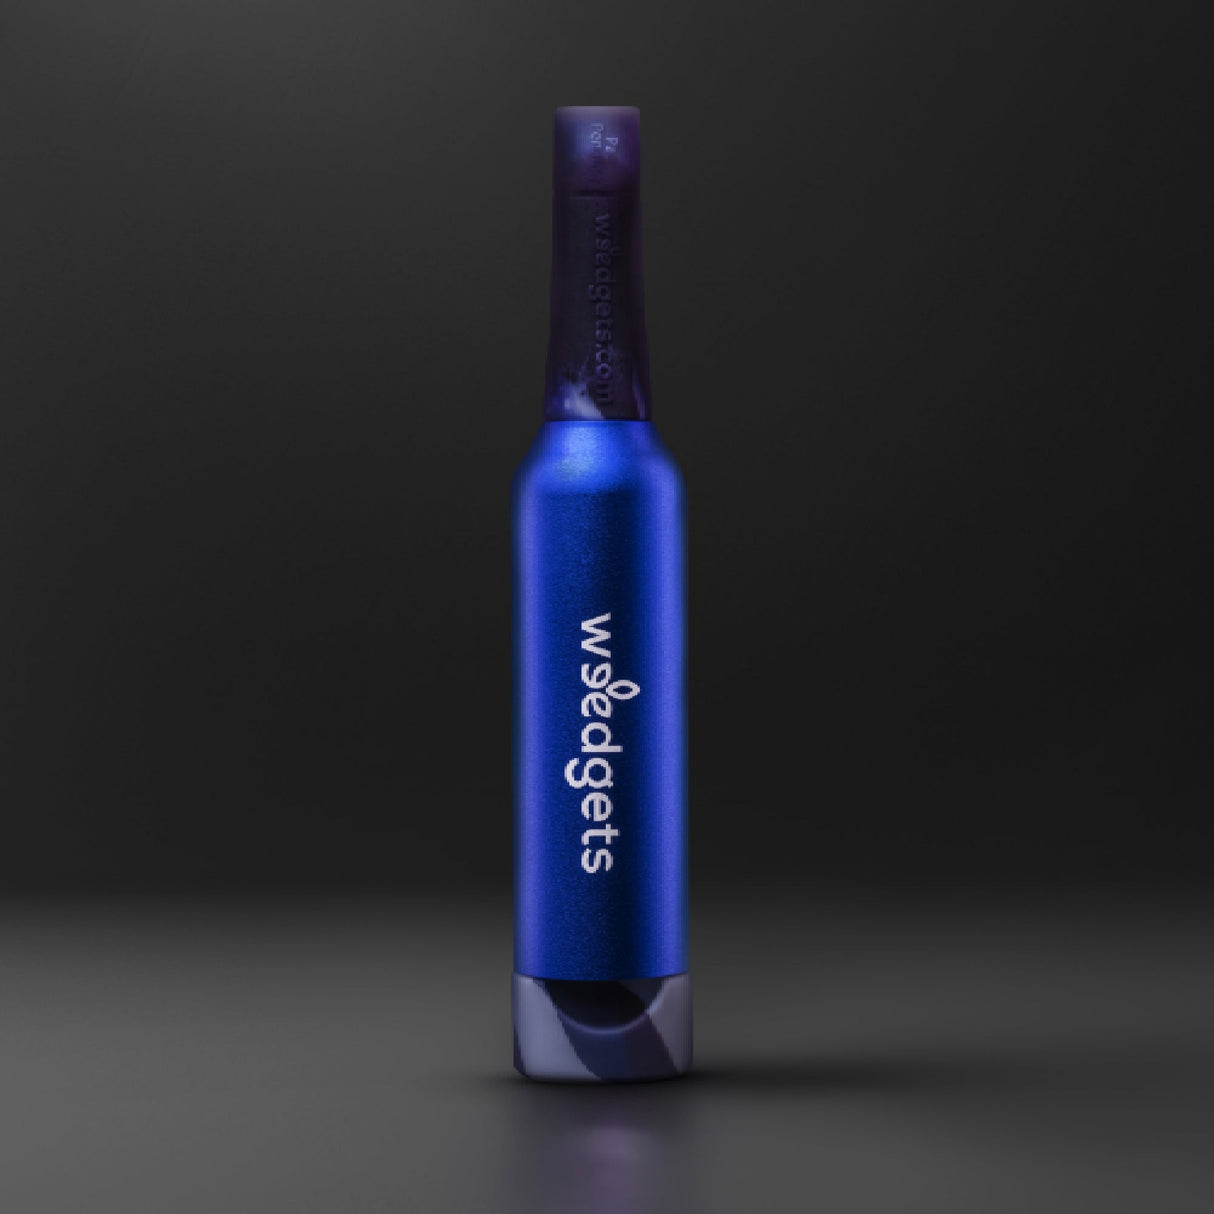 Weedgets Slider Pipe in Blue - Waterless Cooling, Portable, Front View on Dark Background